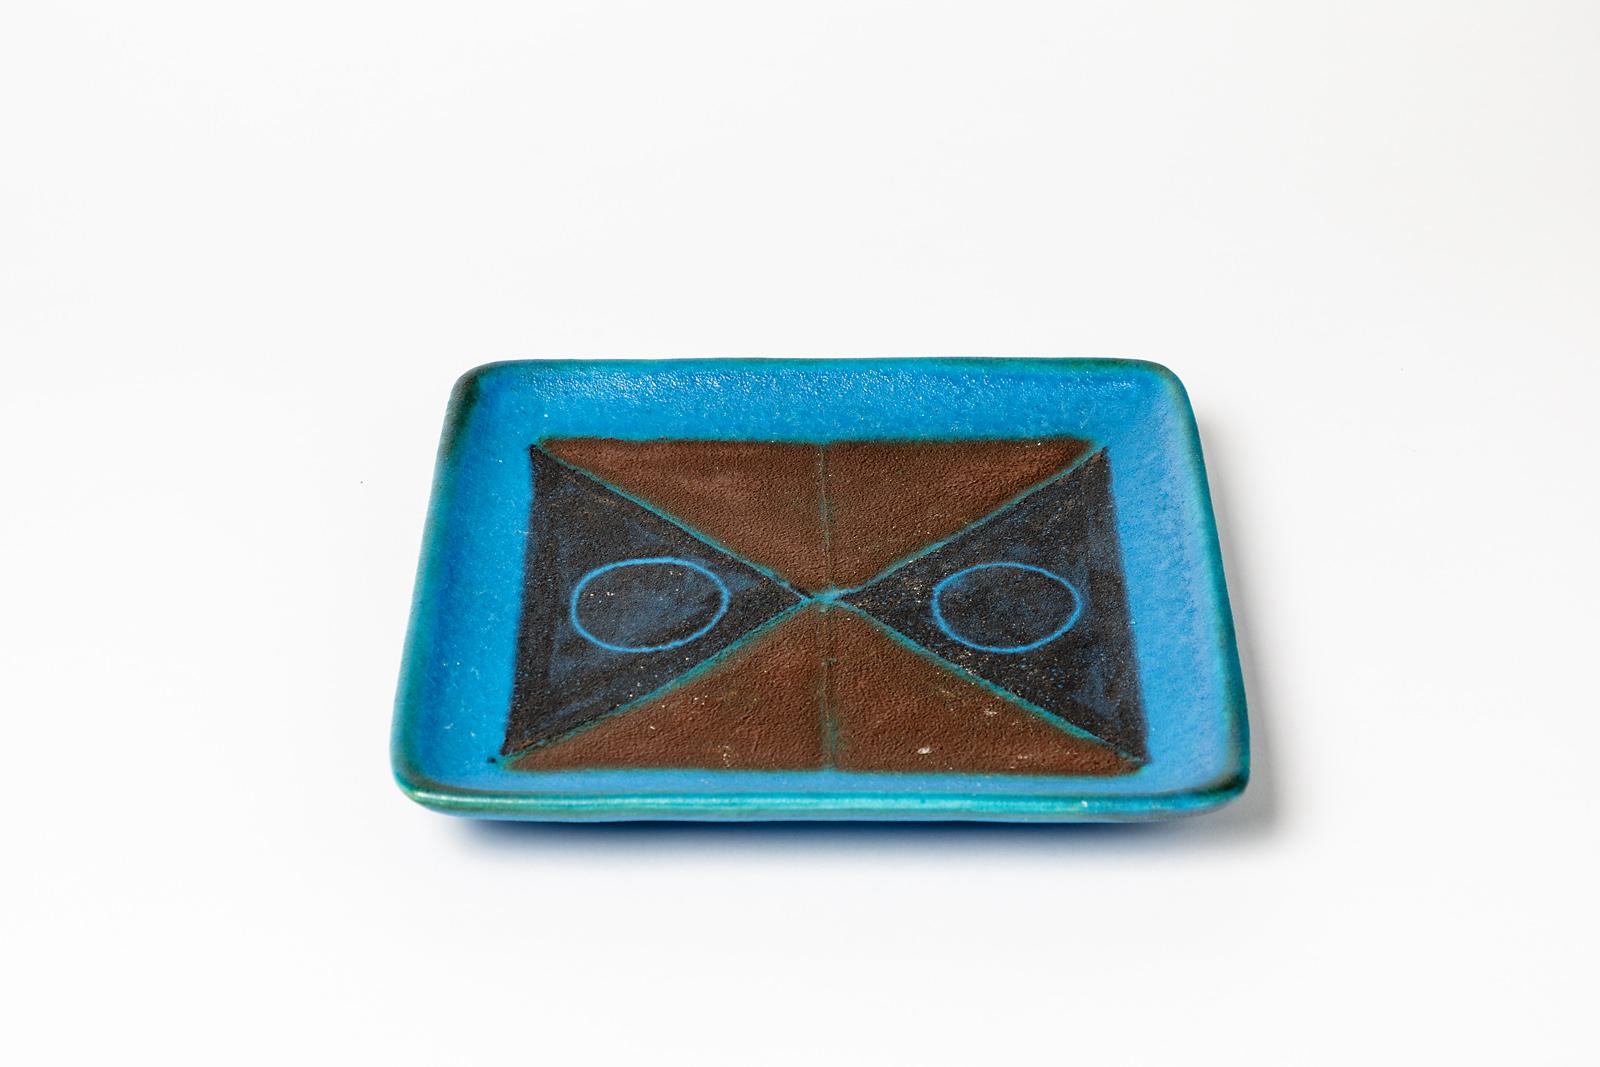 Bruno Gambone

Original blue ceramic plate by Italian artist in 20th midcentury

Realized, circa 1960

Decorative ceramic wall or table plate or dishe

Original perfect condition

Signed under the base

Measures: Height 3cm, large 21cm.